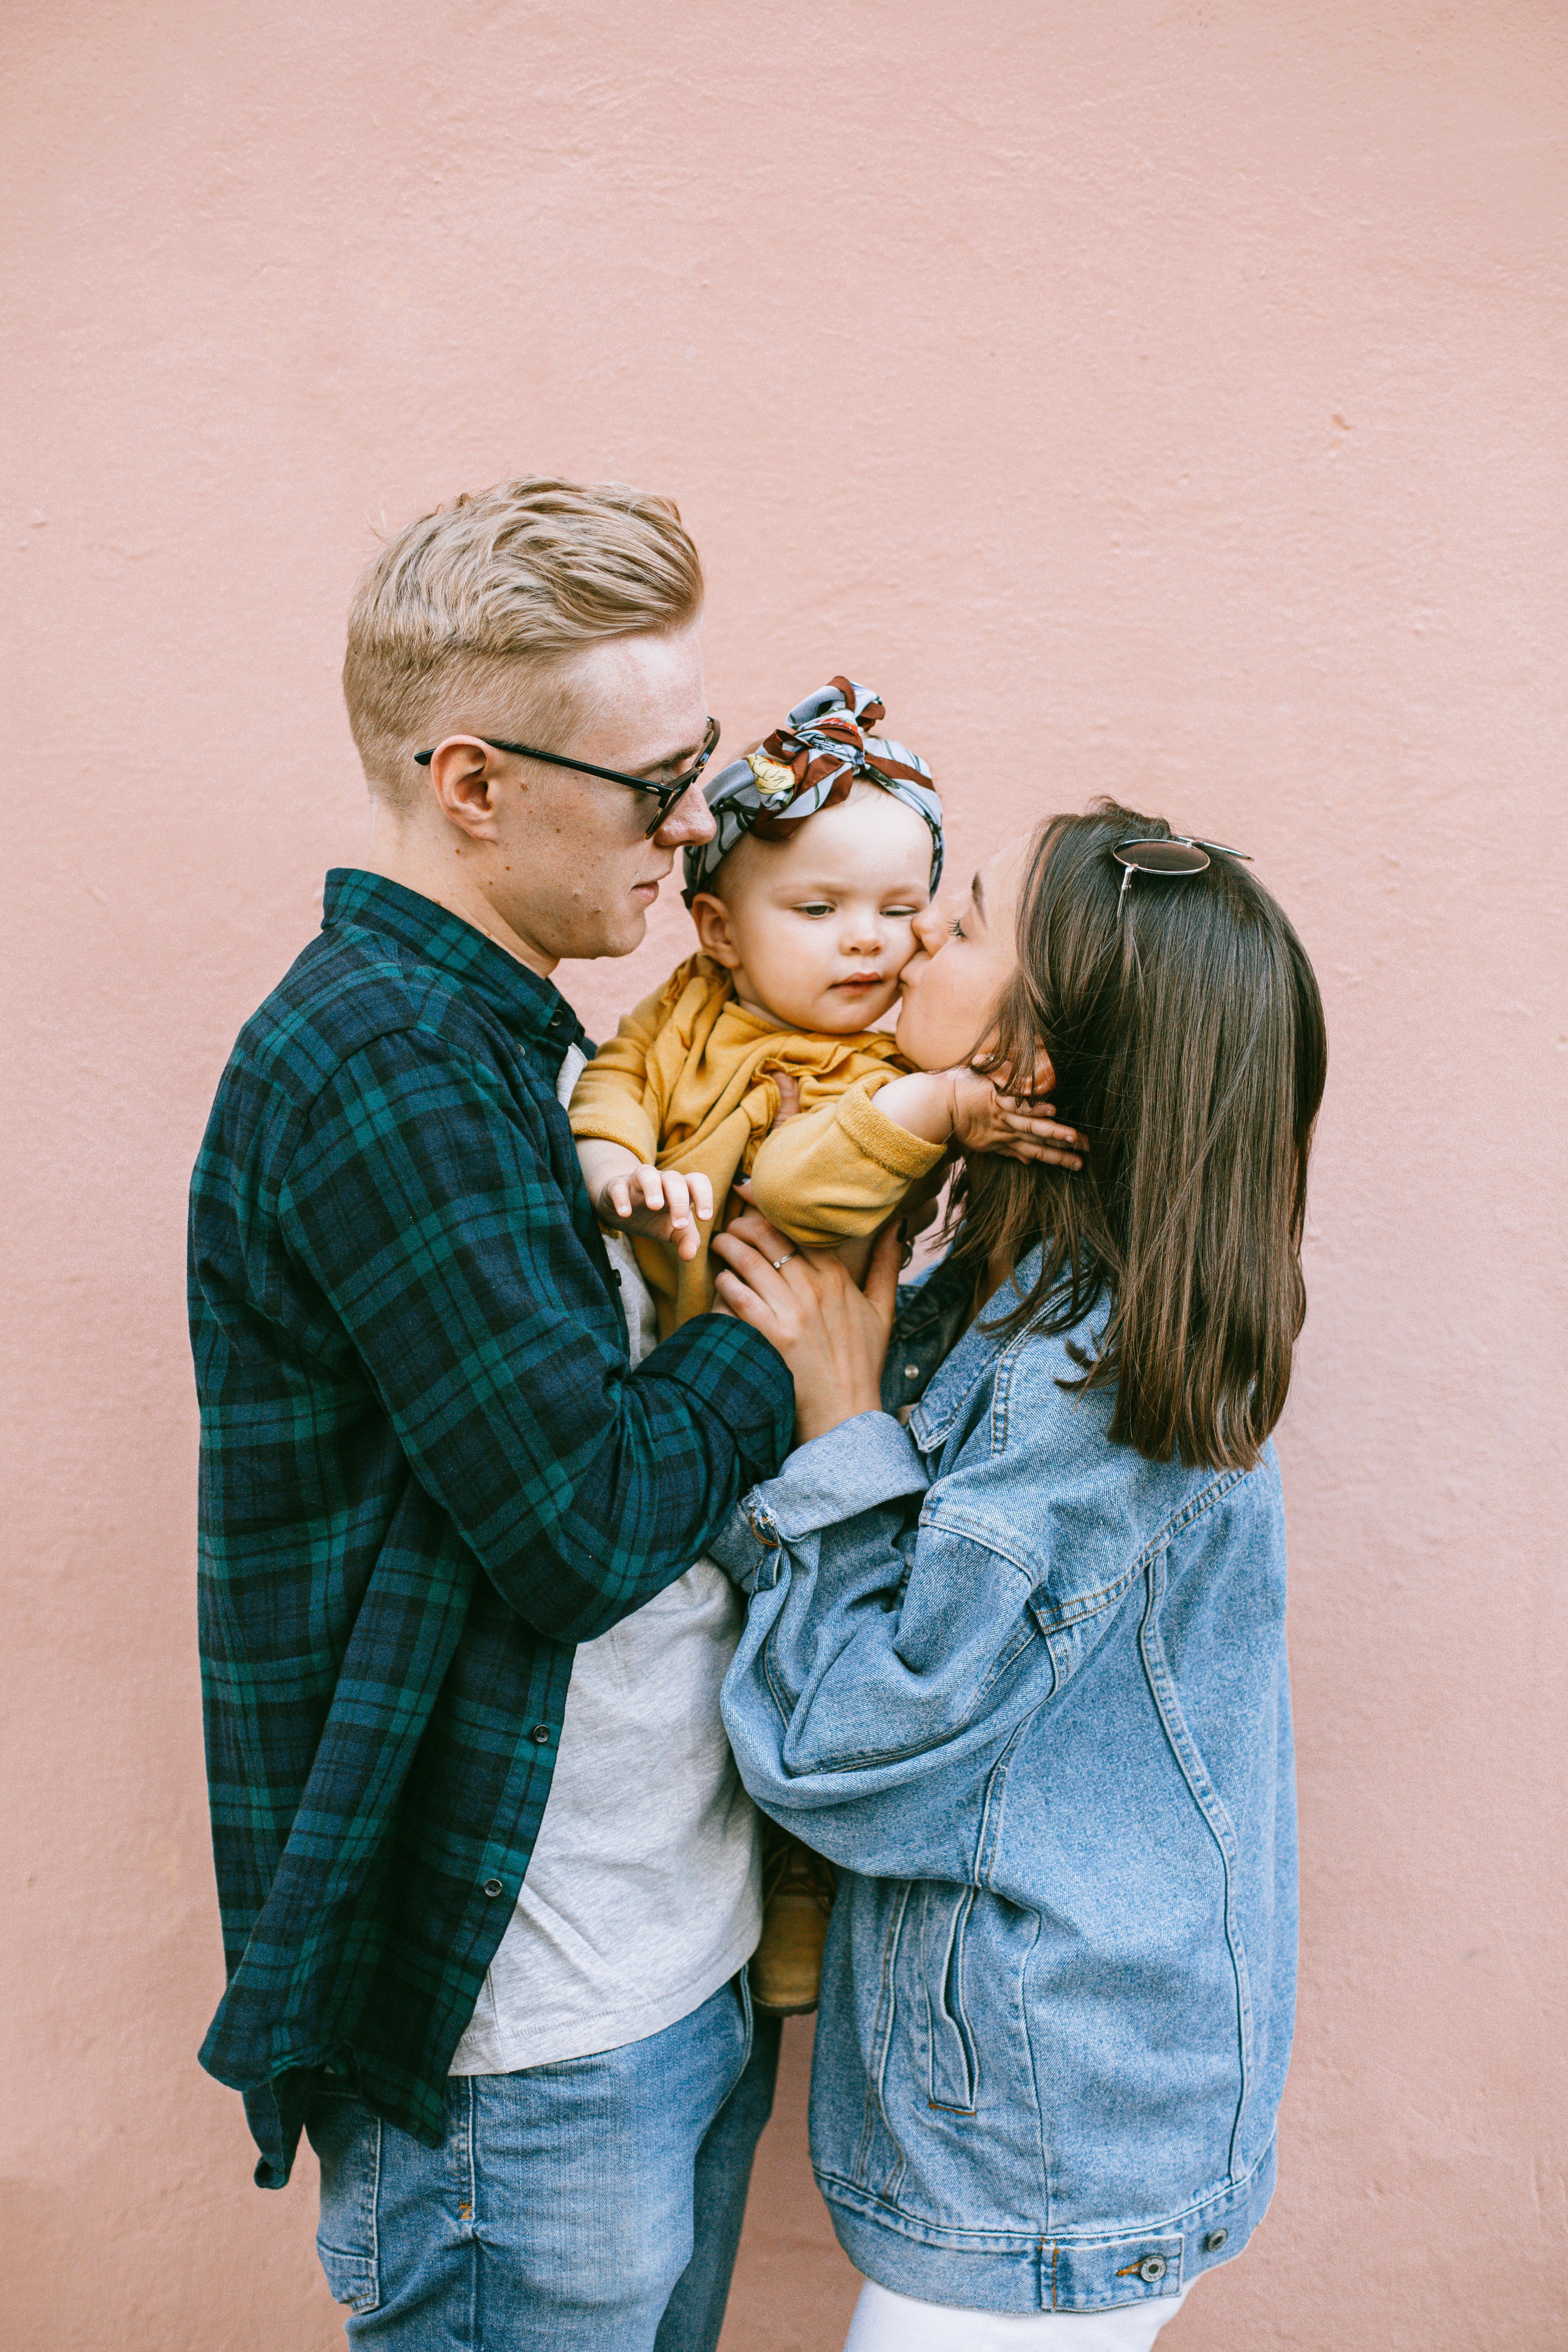 Fred and Madyson adopt Carly's daughter |  Photo: Pexels